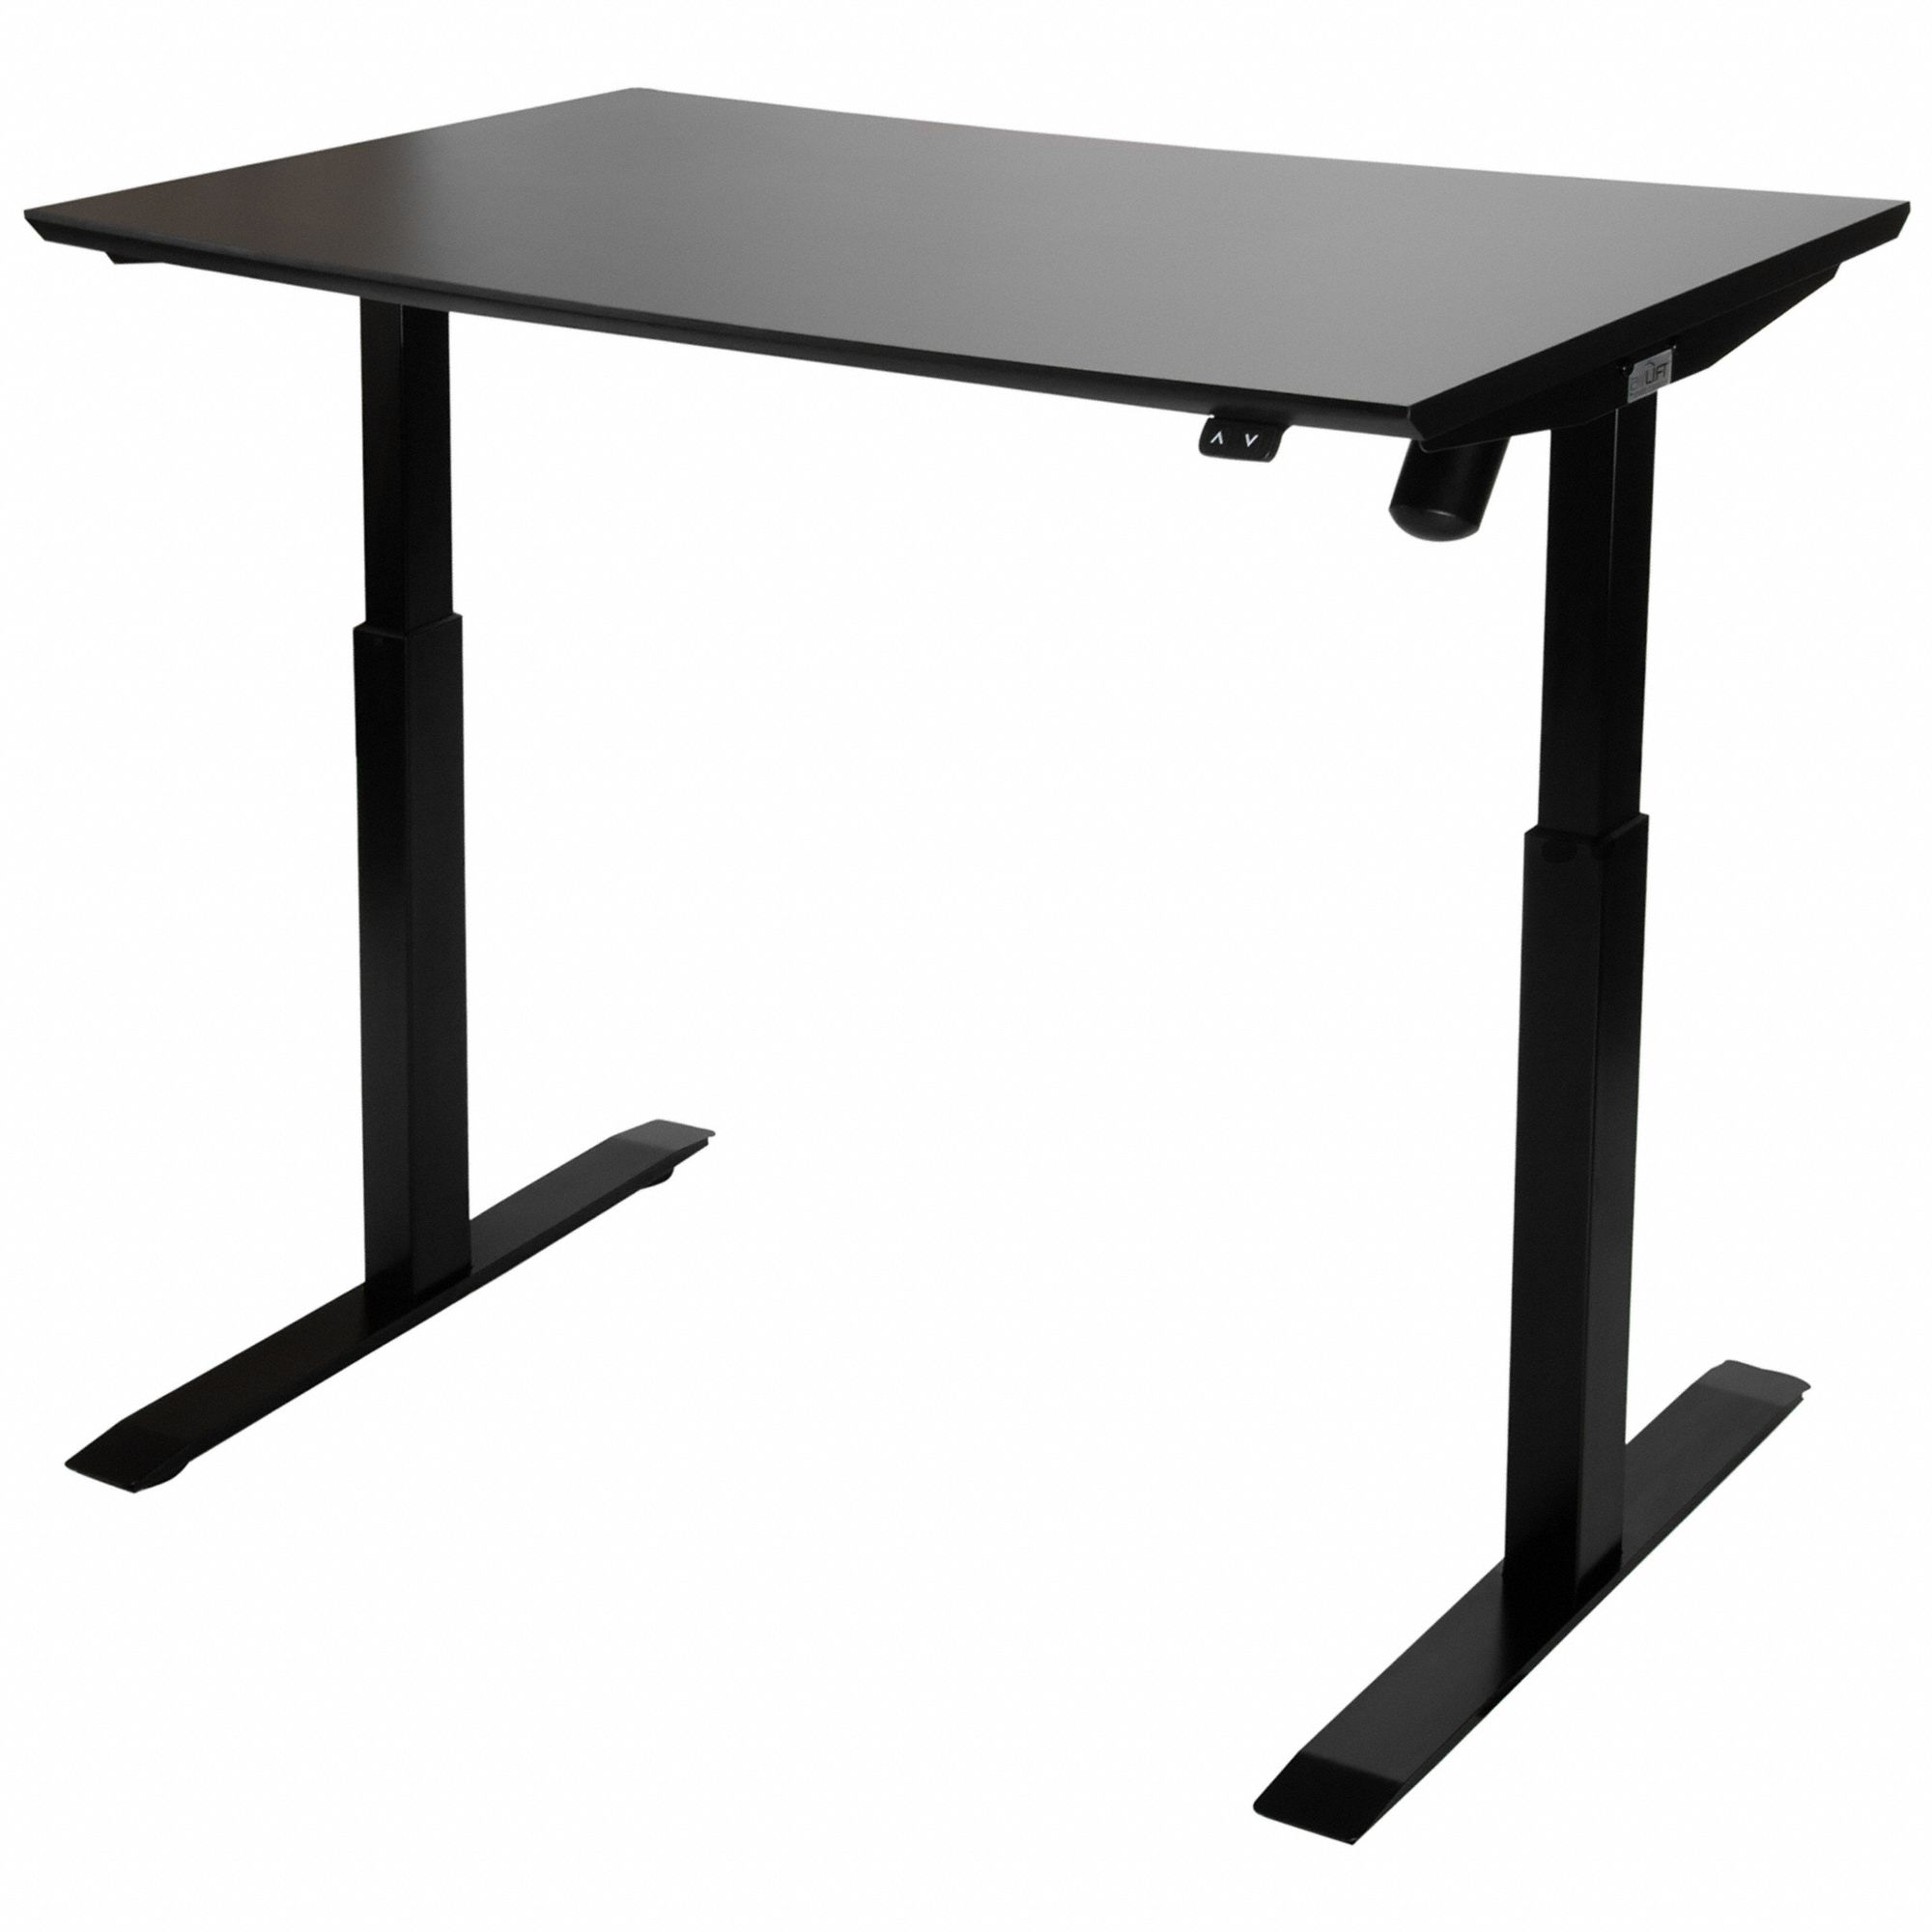 Adjustable Desk: 47 in Overall Wd, 28 in to 47 in, 24 in Overall Dp, Black Top